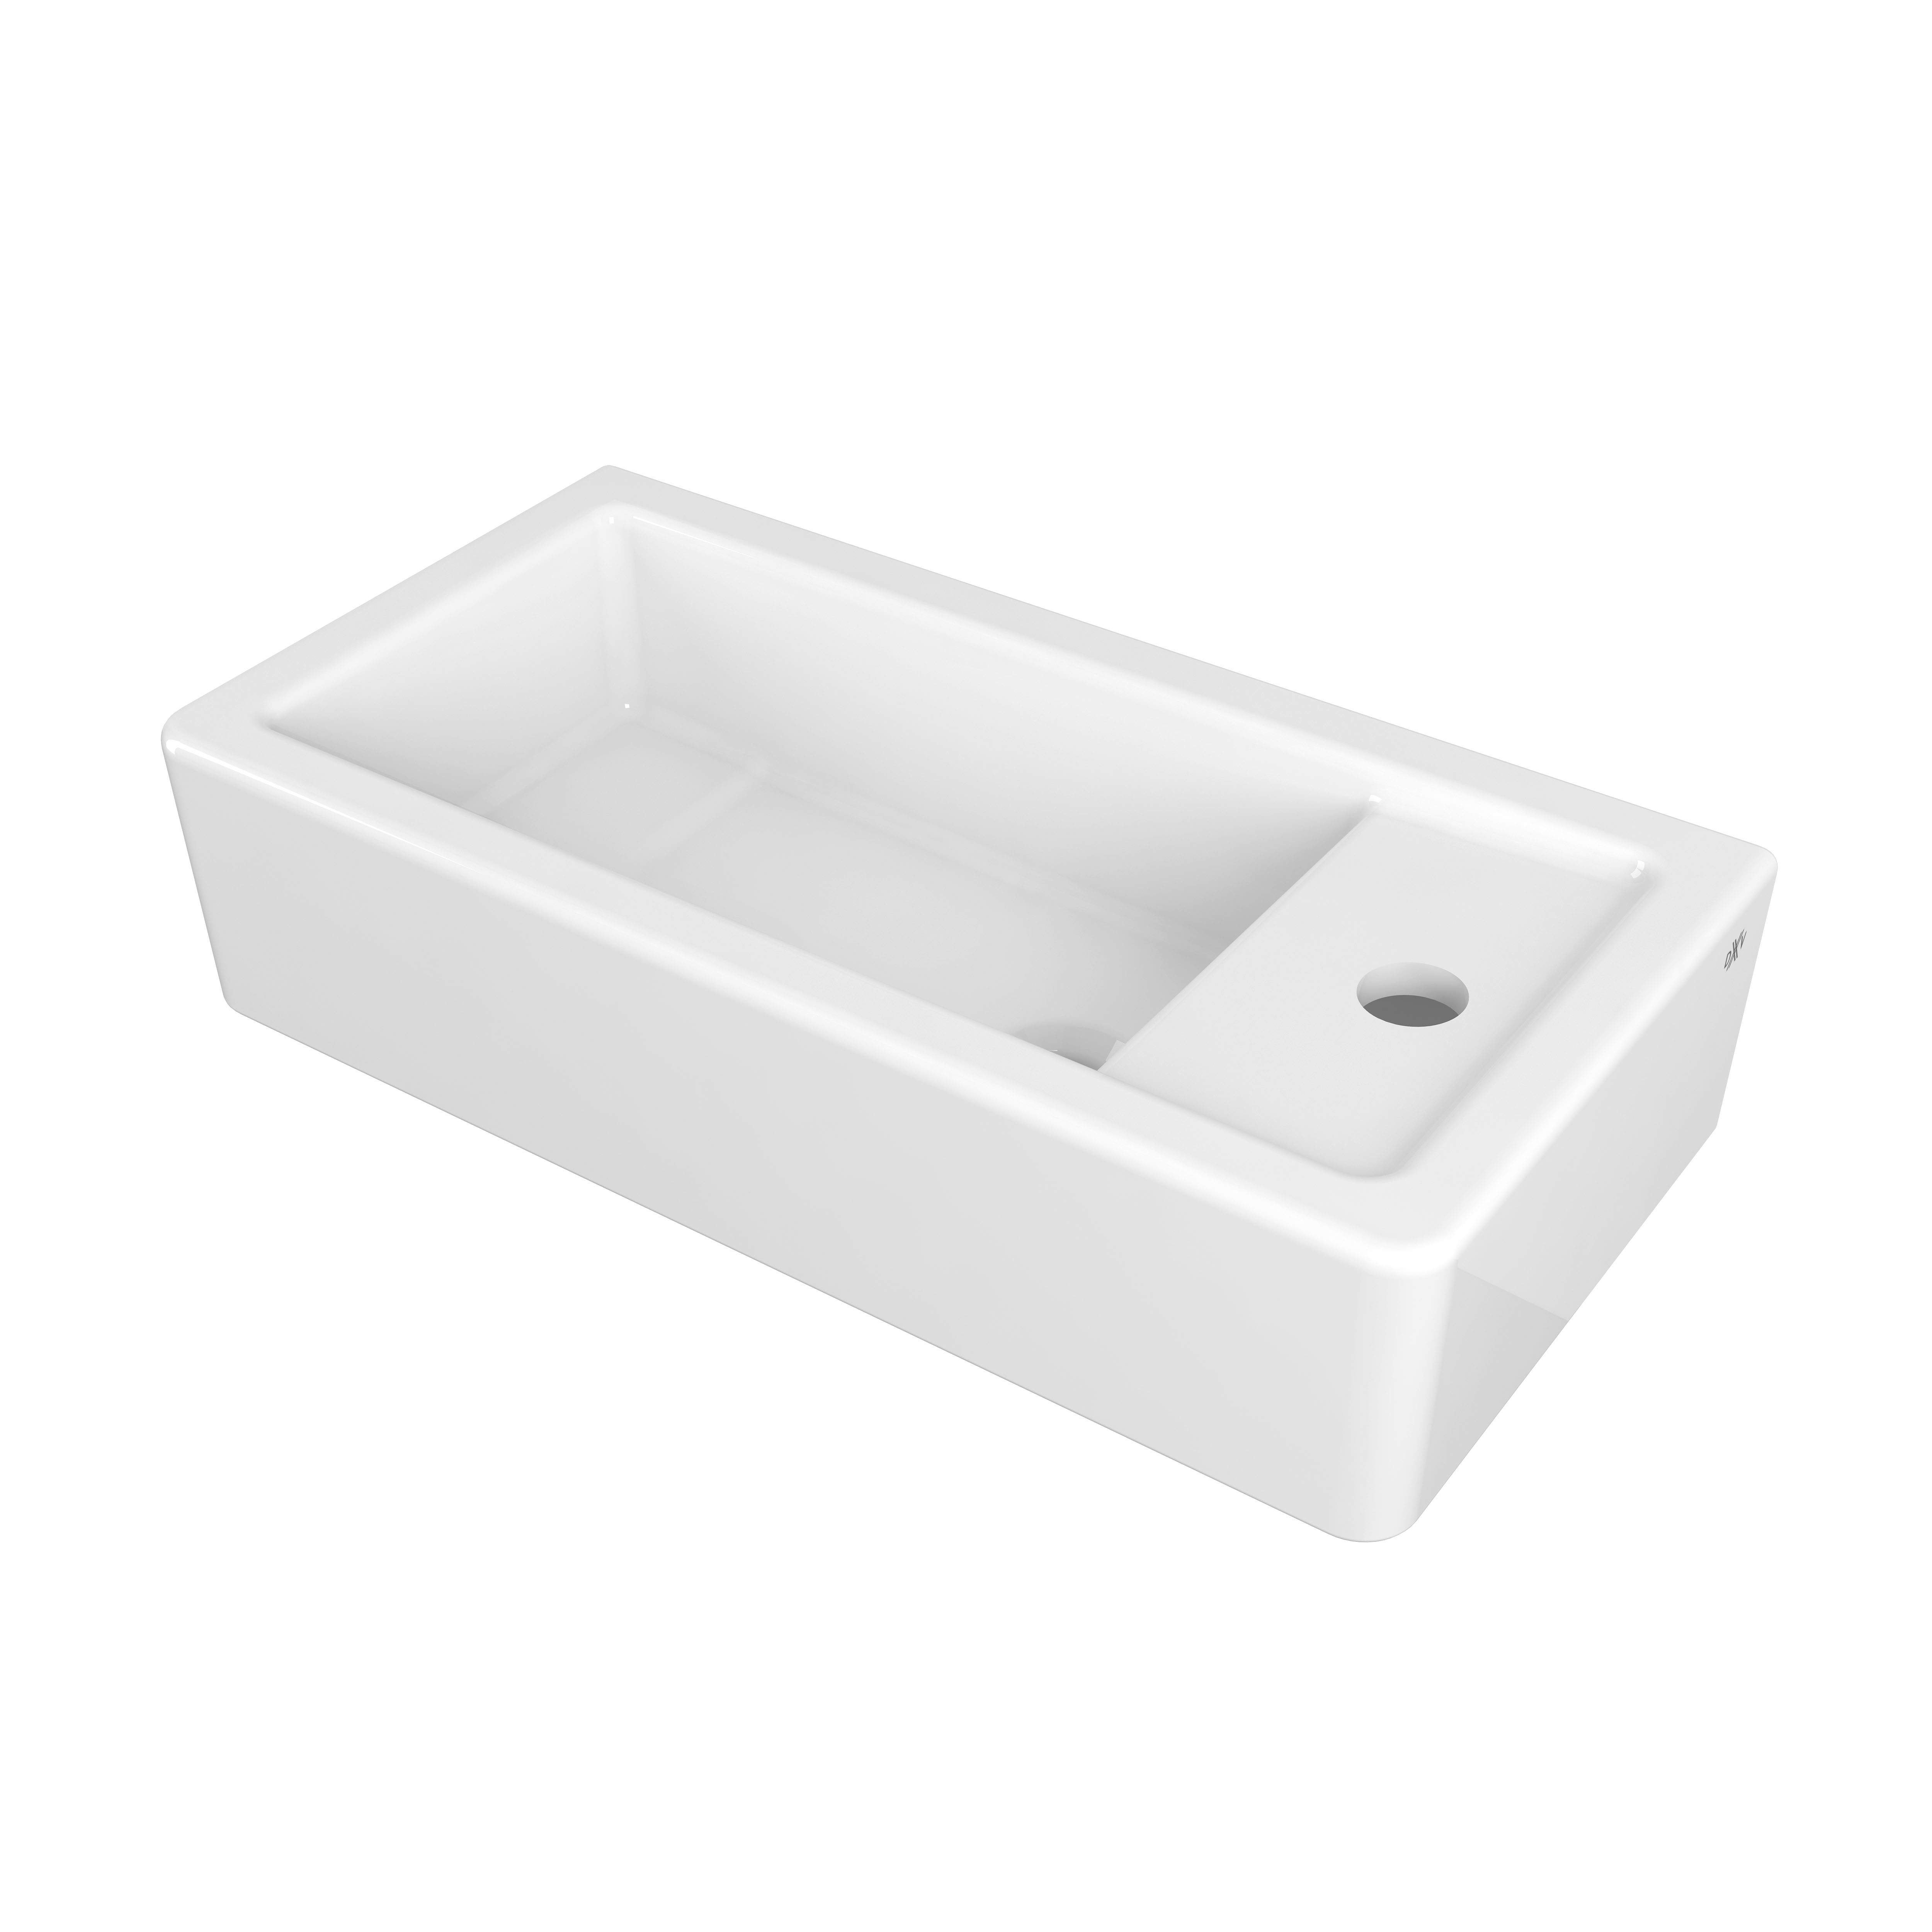 Cossu 20 in. Wall Hung Bathroom Sink, Single Hole with Right Hand Drain